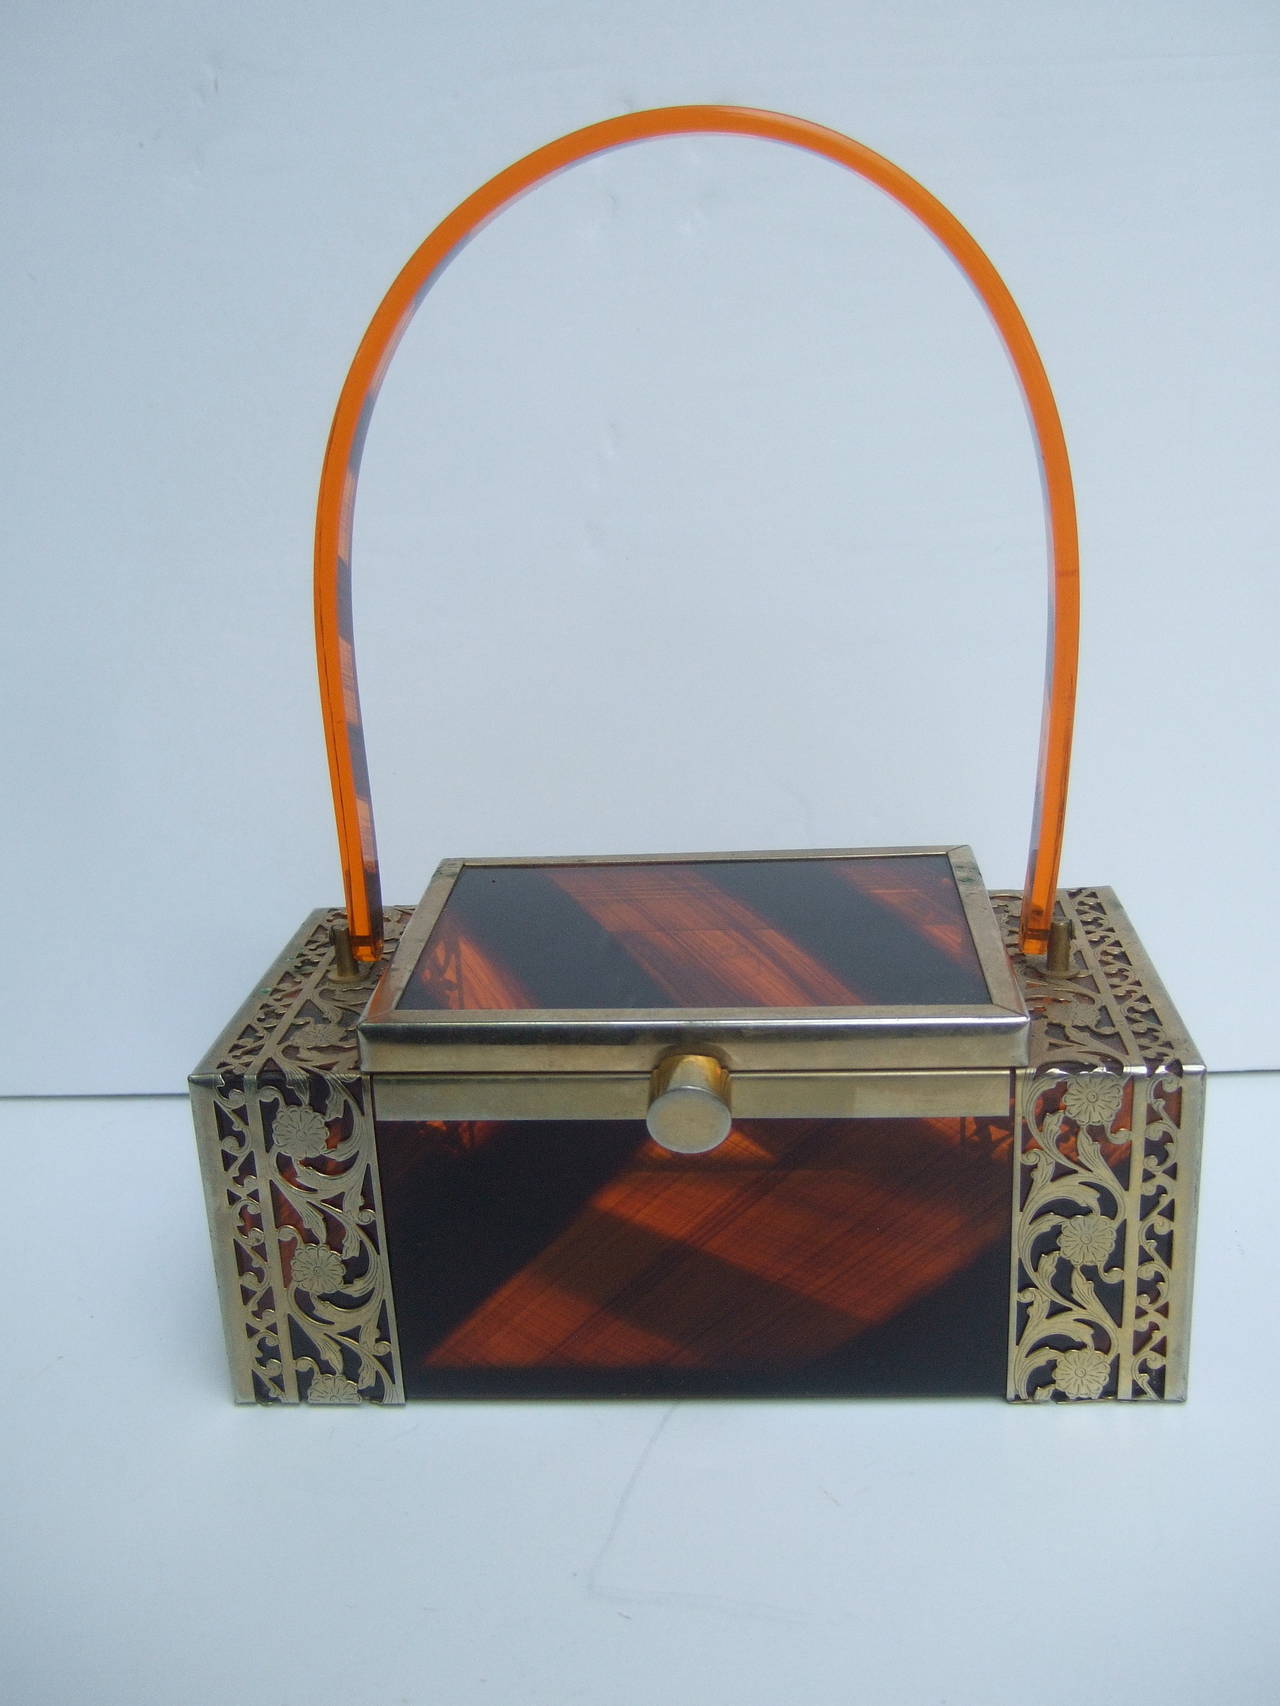 1950s Tortoise shell lucite filigree box style handbag 
The sleek retro handbag is constructed with brown
& amber color streaked lucite panels 

The mid-century box shaped handbag is framed
with gilt metal filigree borders. The swivel